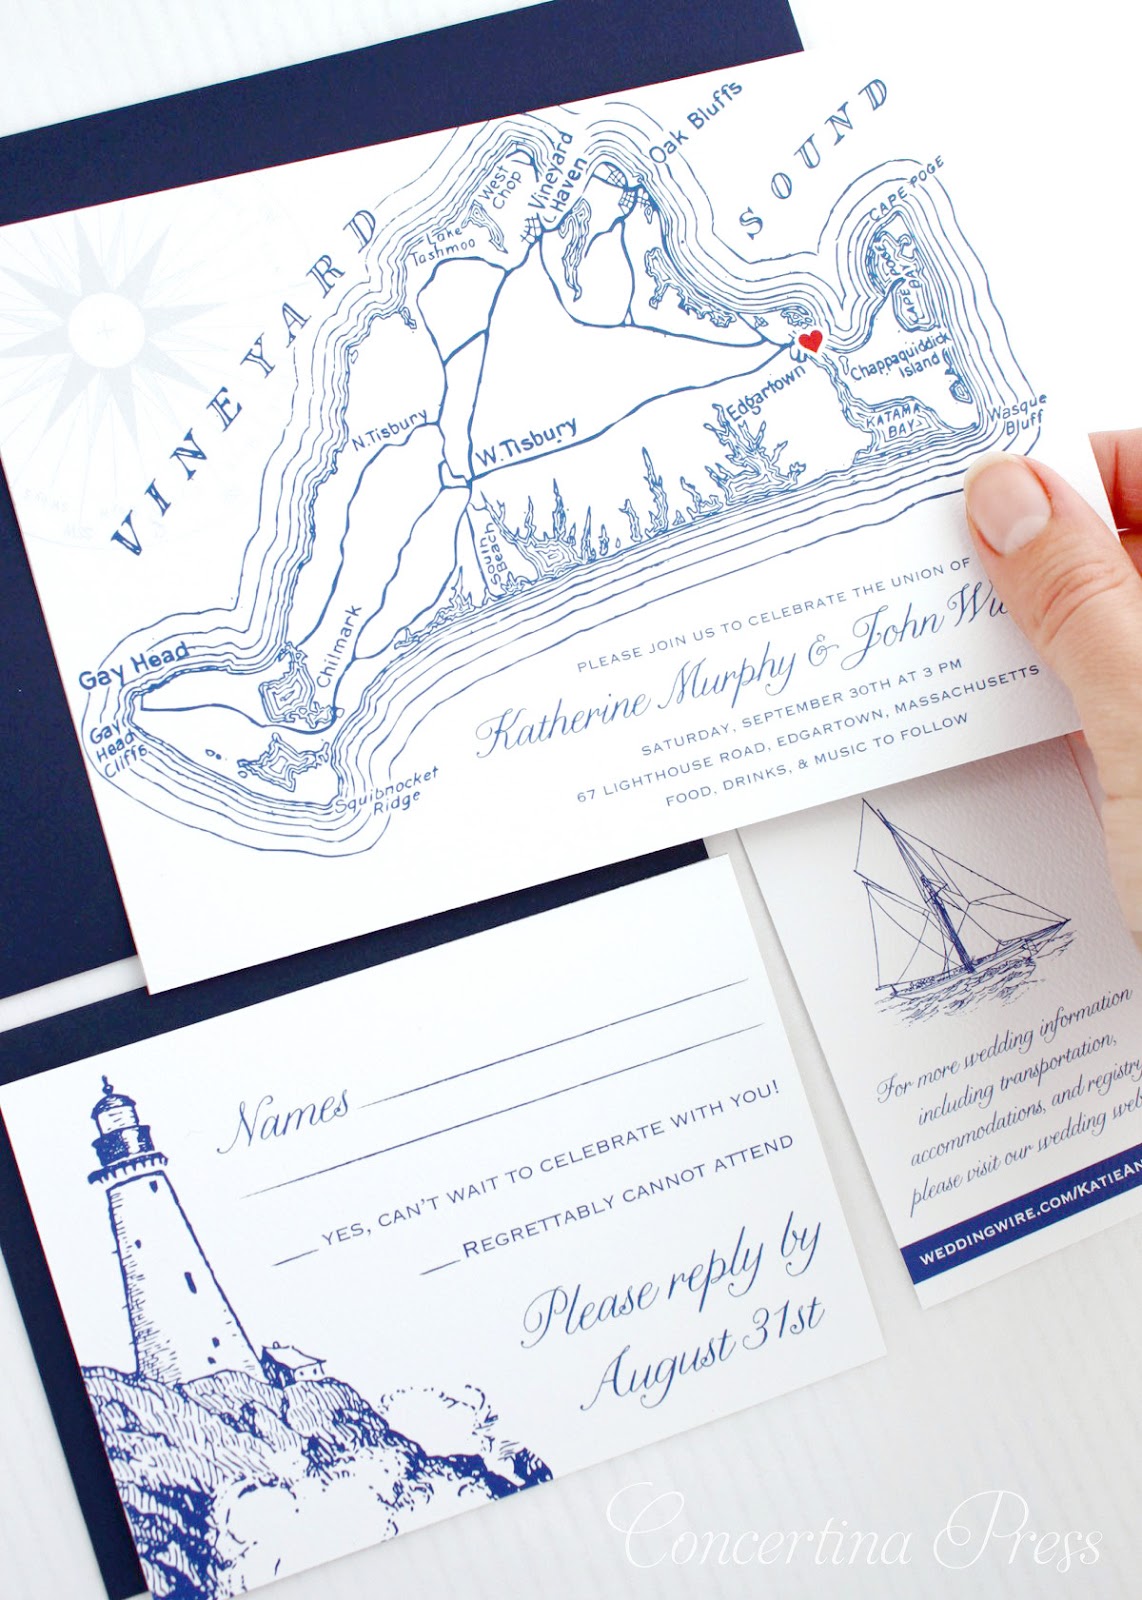 Martha's Vineyard Wedding Invitations from Concertina Press - with map and free website card